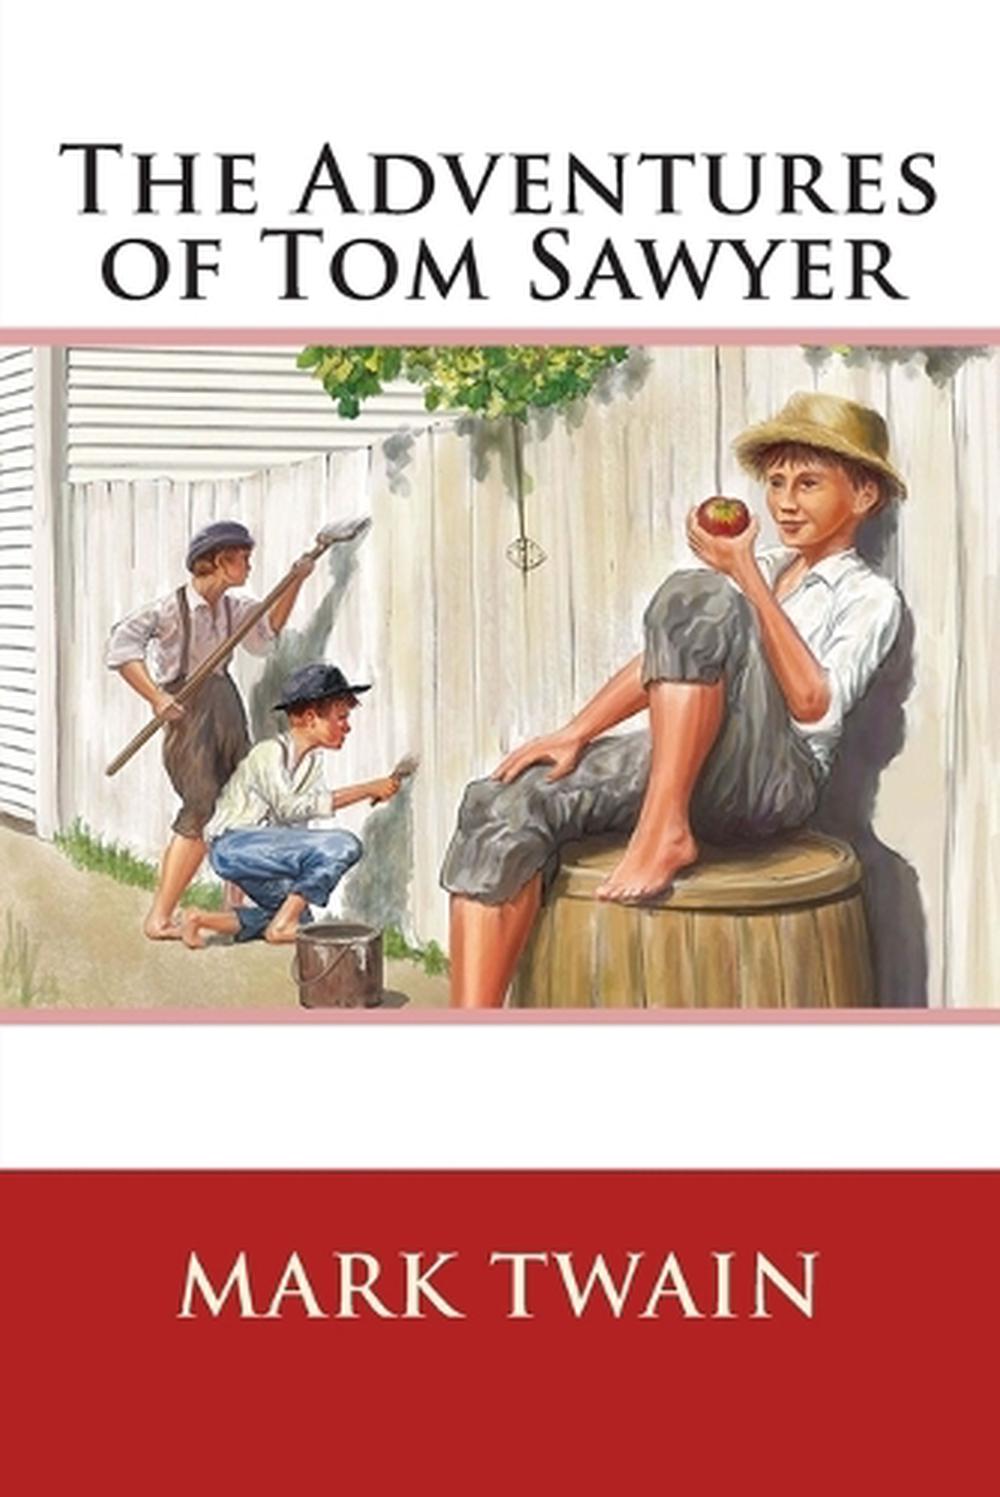 The Adventures of Tom Sawyer A Novel by Mark Twain (English) Paperback